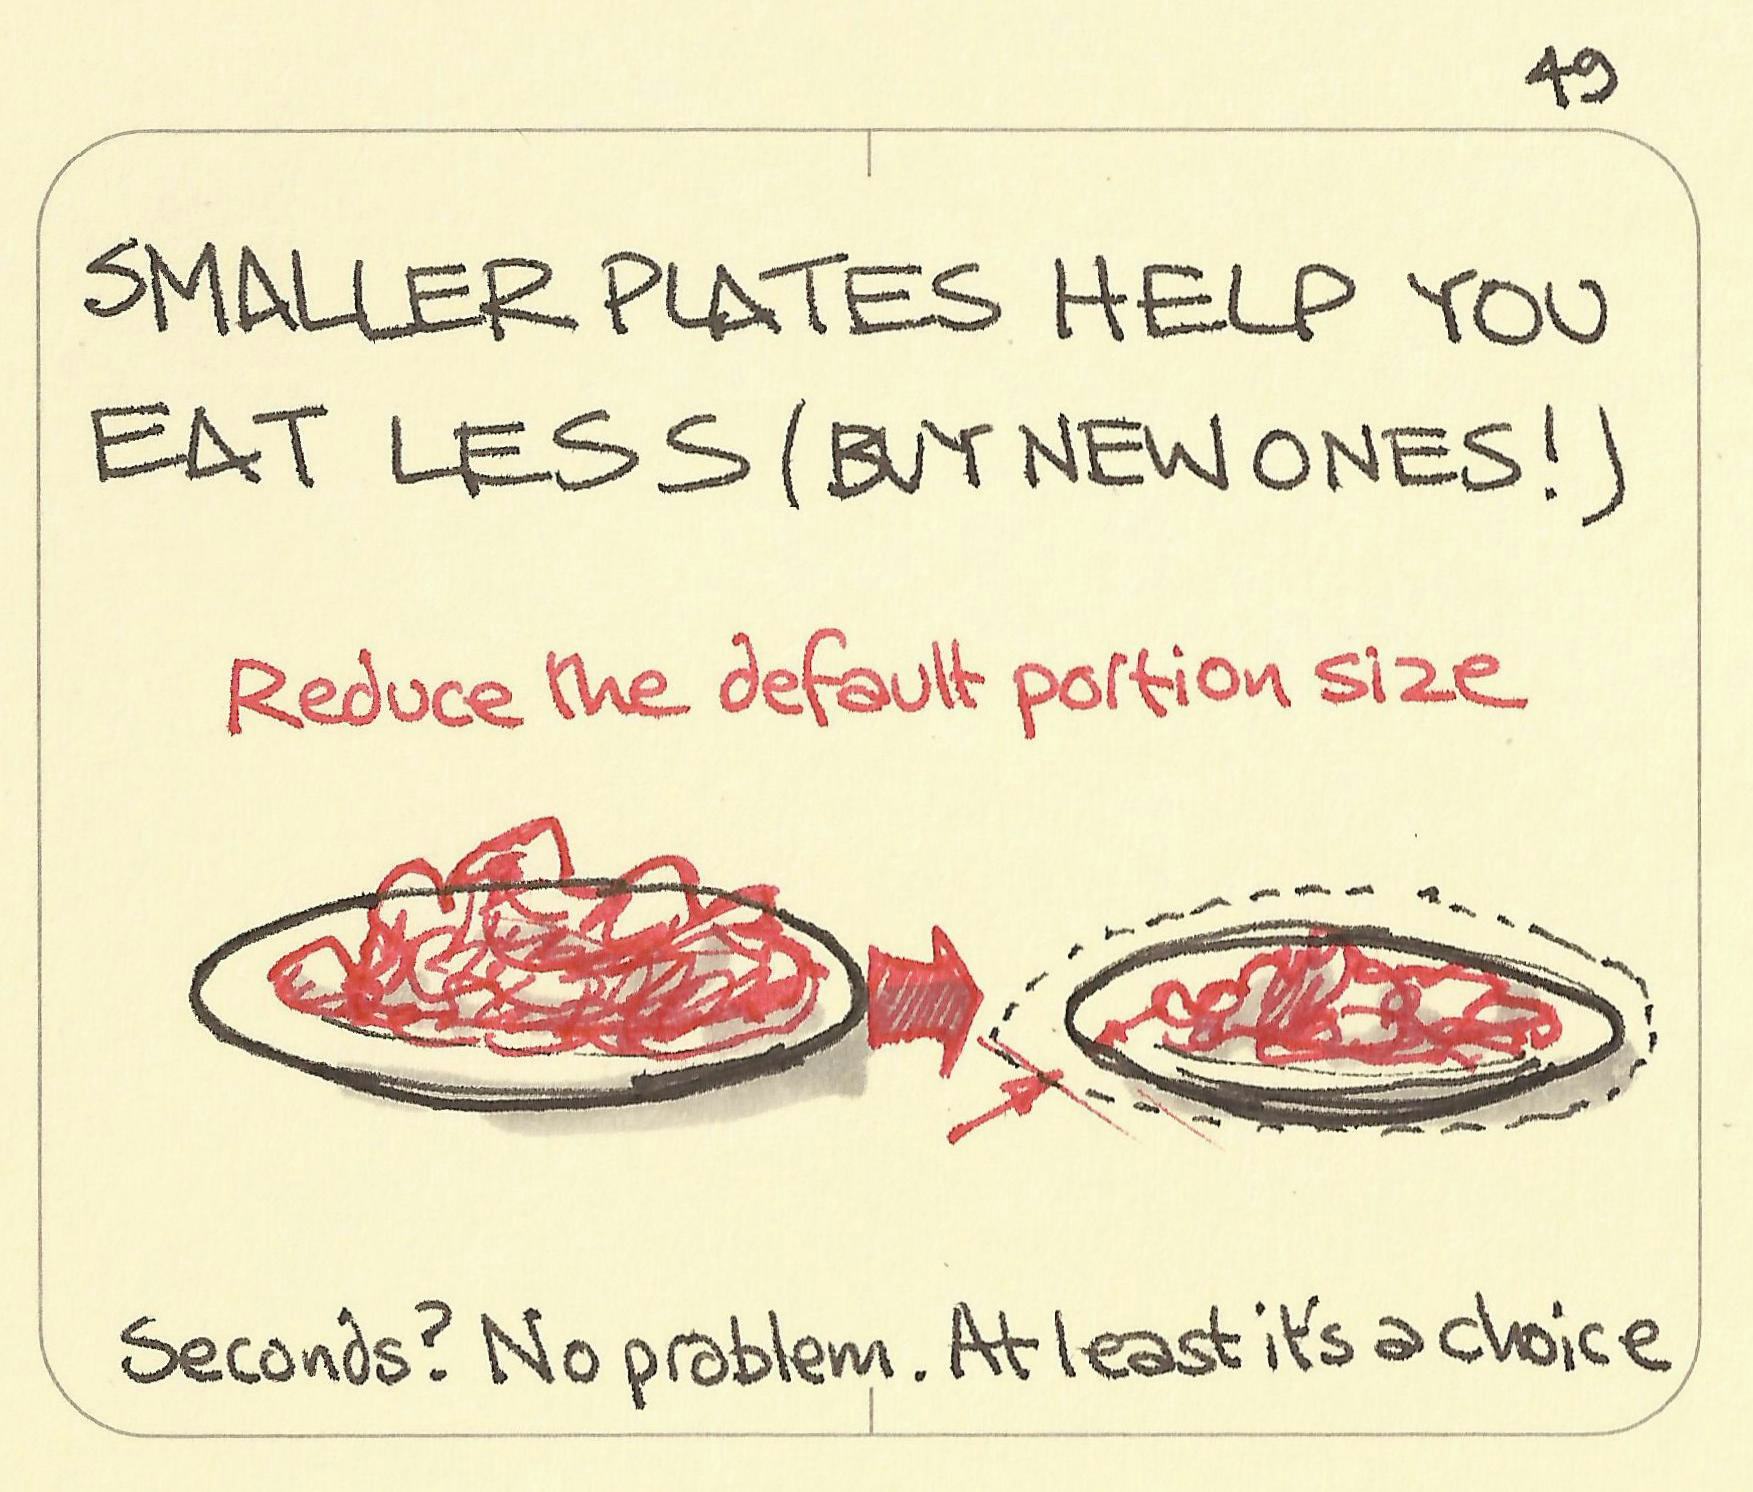 Smaller plates help you eat less - Sketchplanations